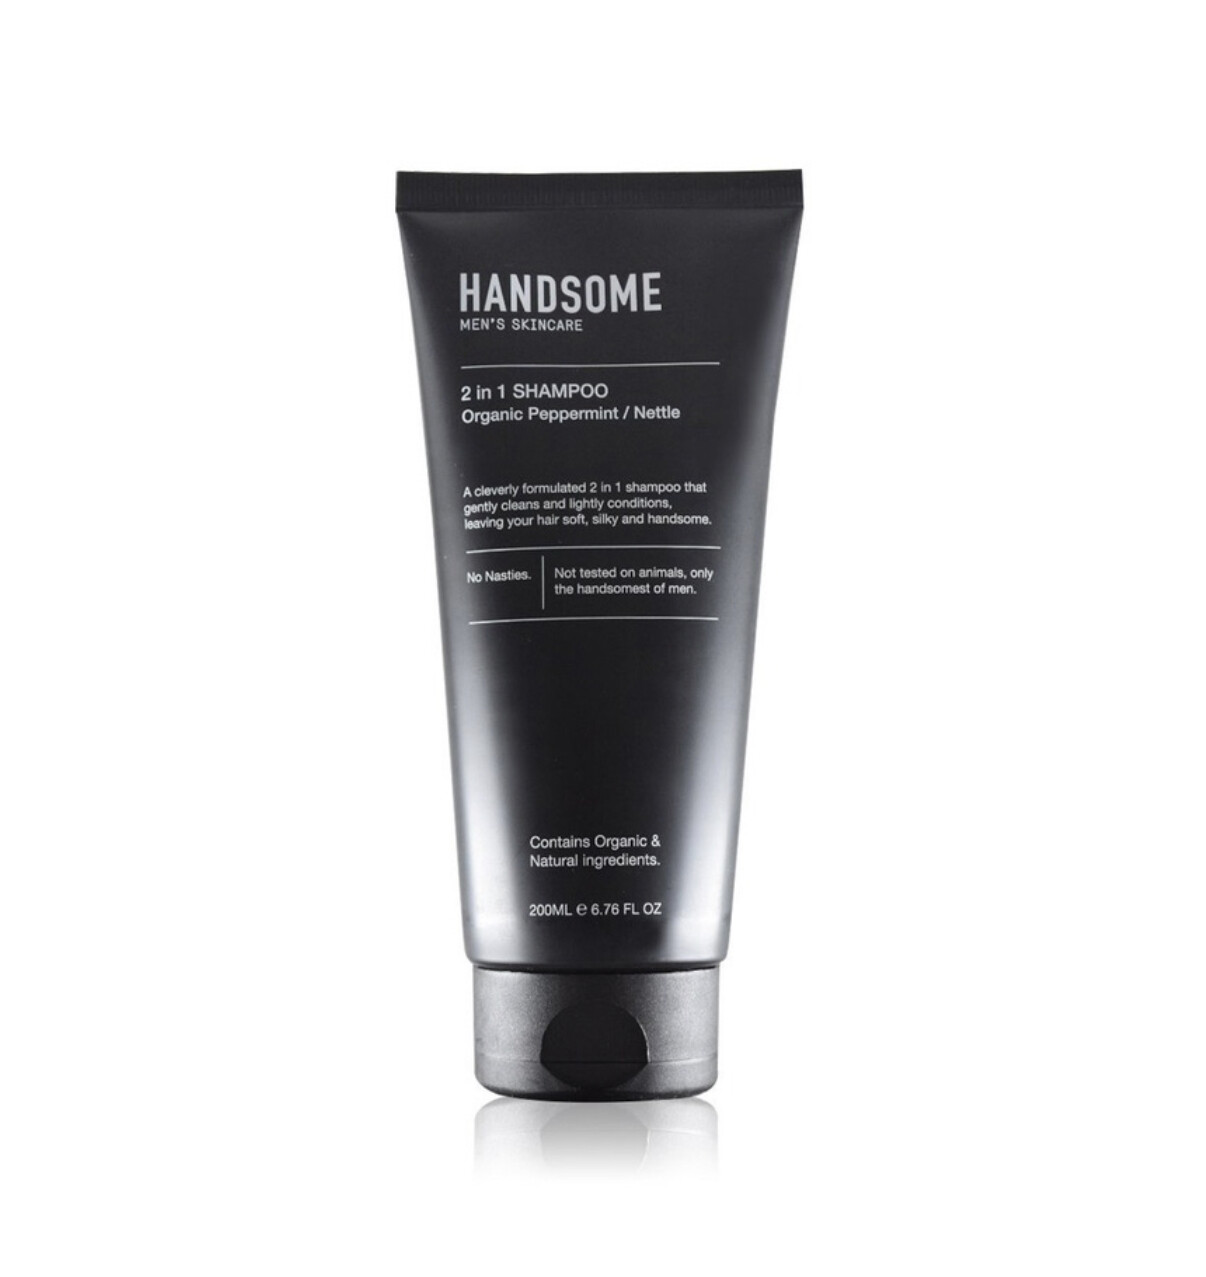 HANDSOME 2 IN 1 SHAMPOO